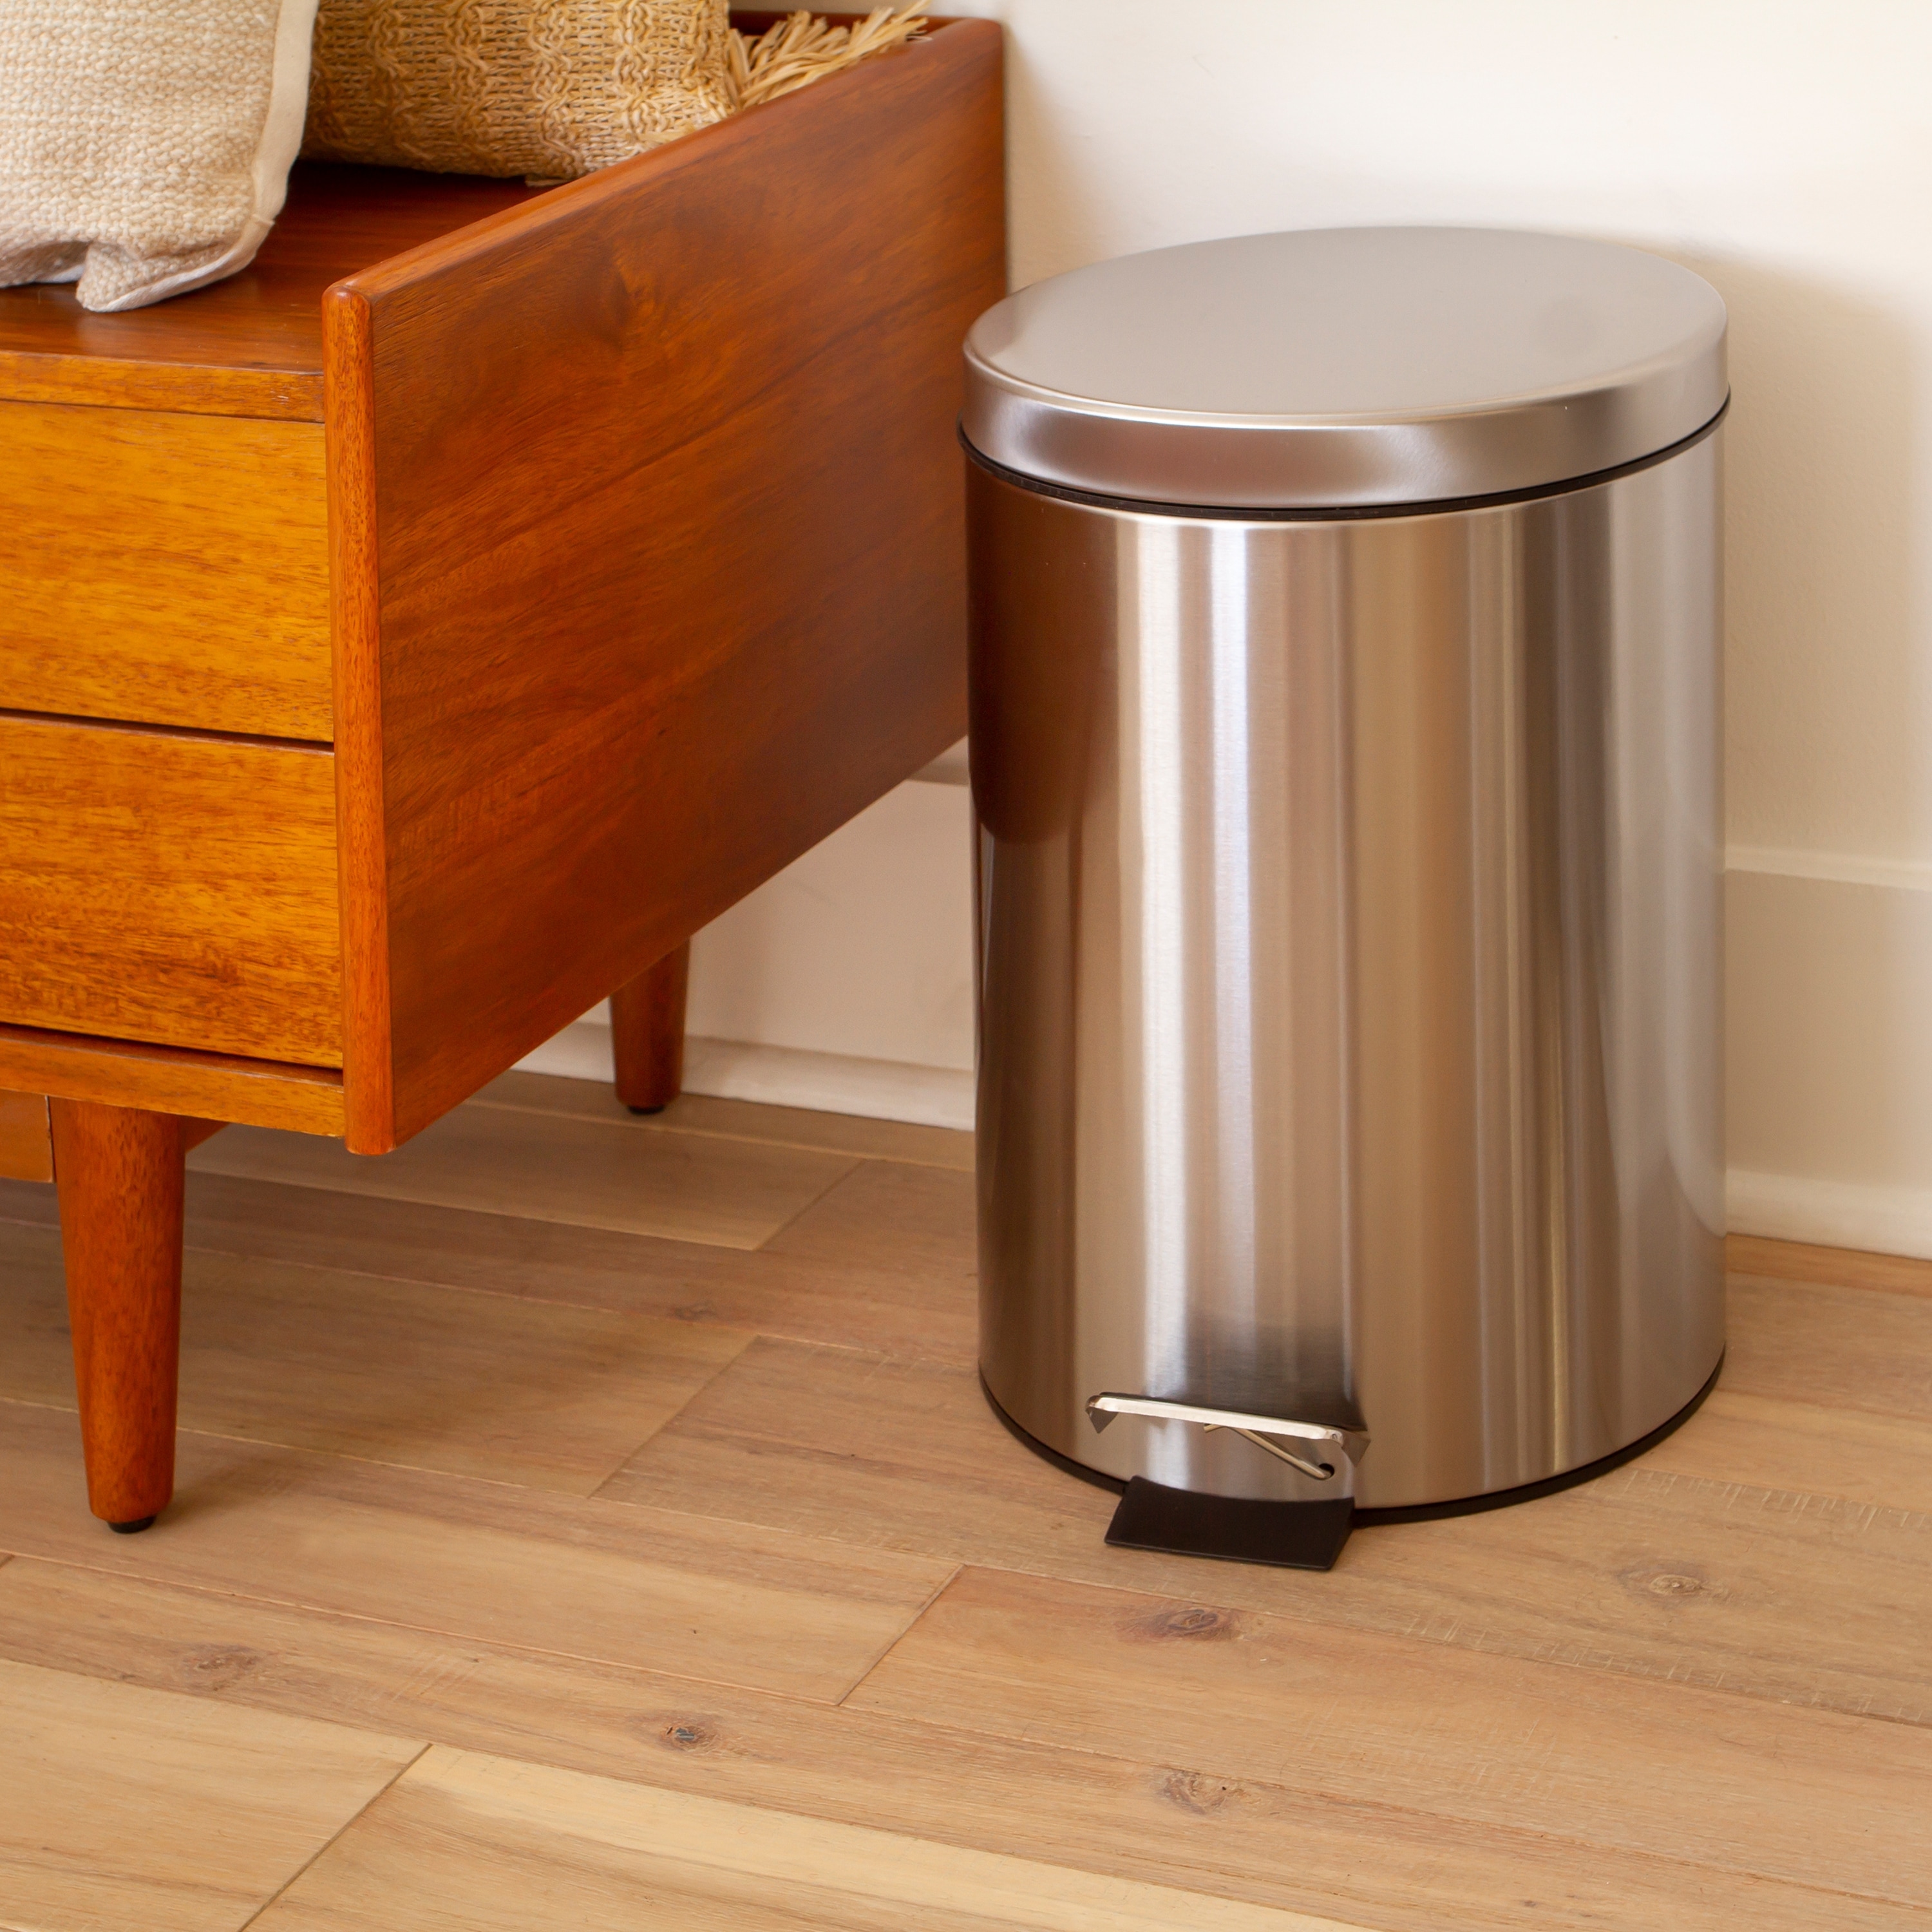 Basics Round Cylindrical Trash Can With Soft-Close Foot Pedal, 30  Liter/7.9 Gallon, Brushed Stainless Steel